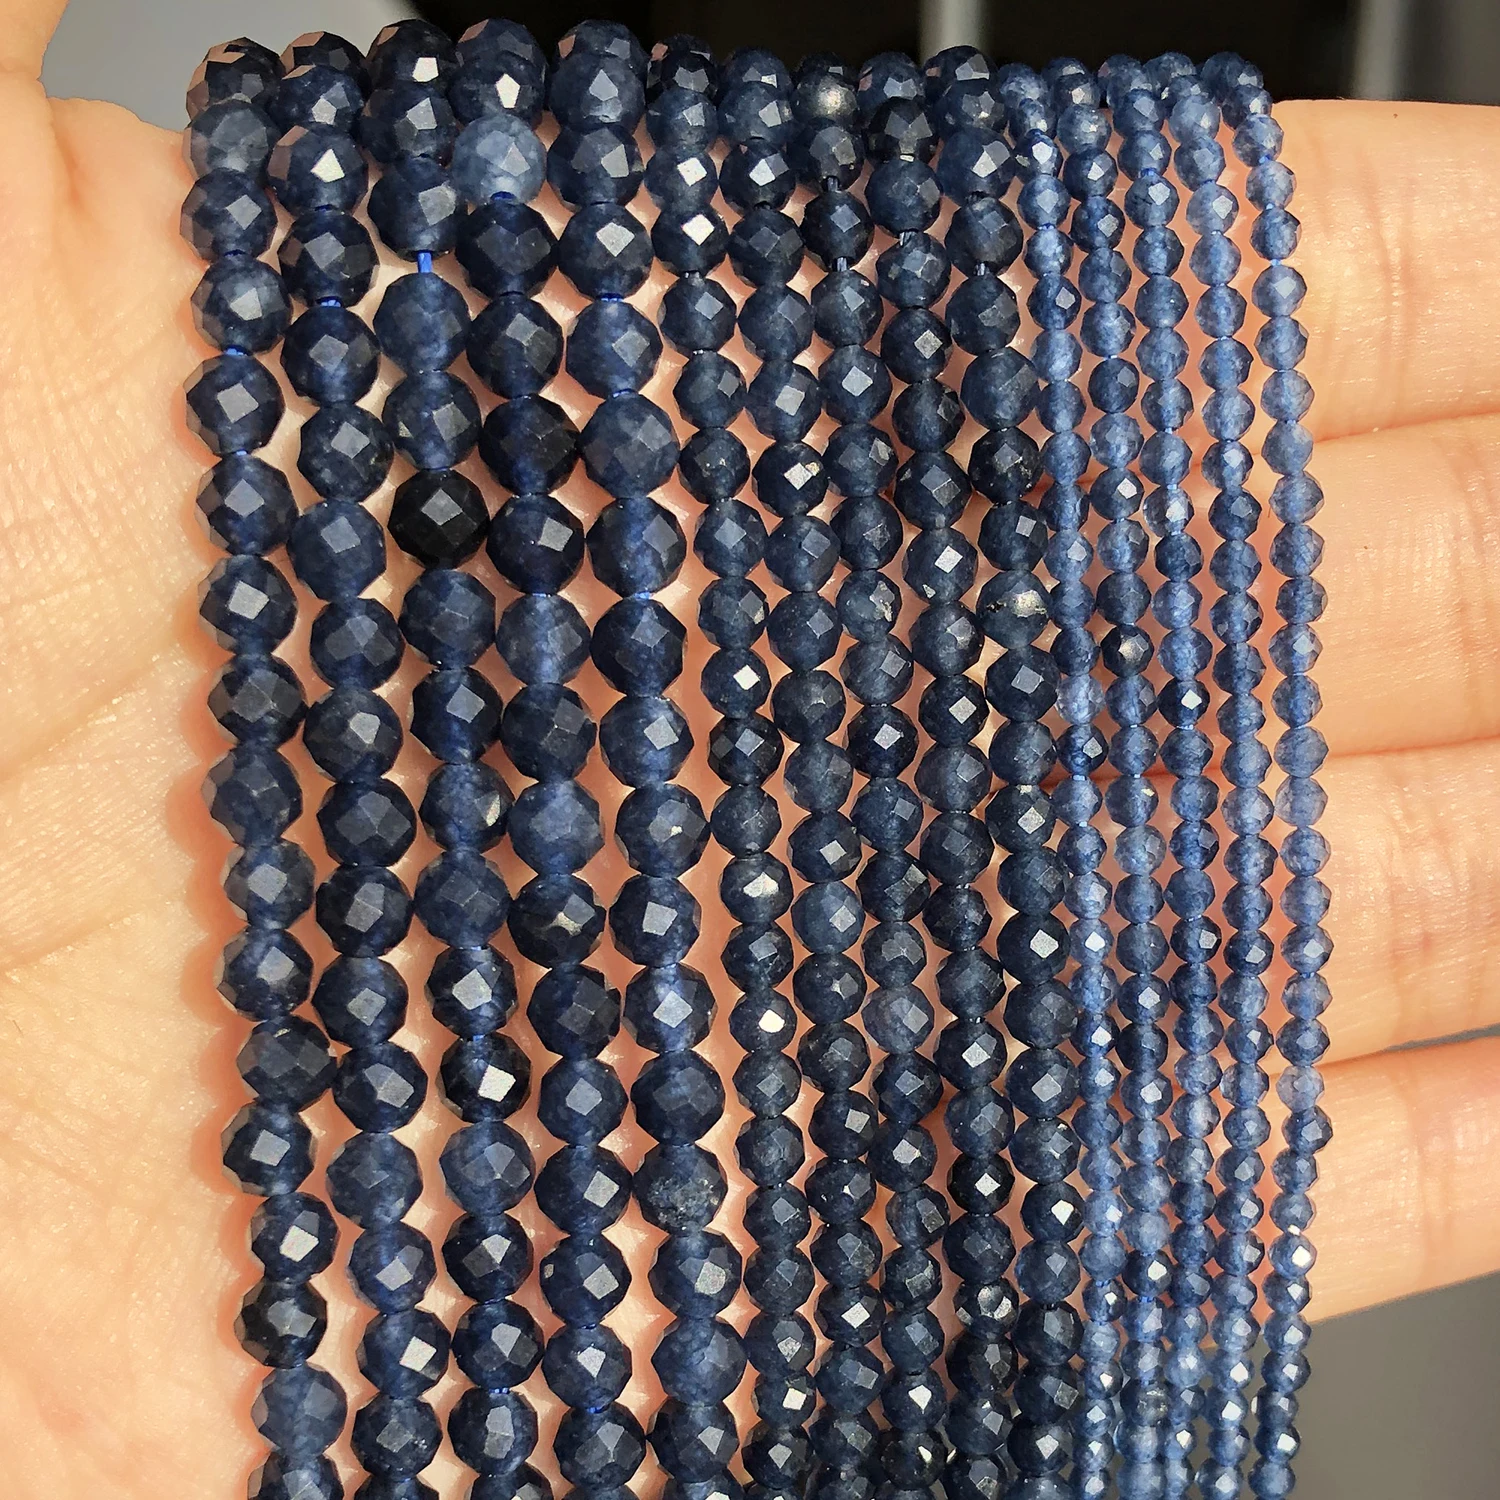 Blue Sapphire Natural Faceted Stone Beads Loose Spacer Beads Bracelet for - £6.20 GBP